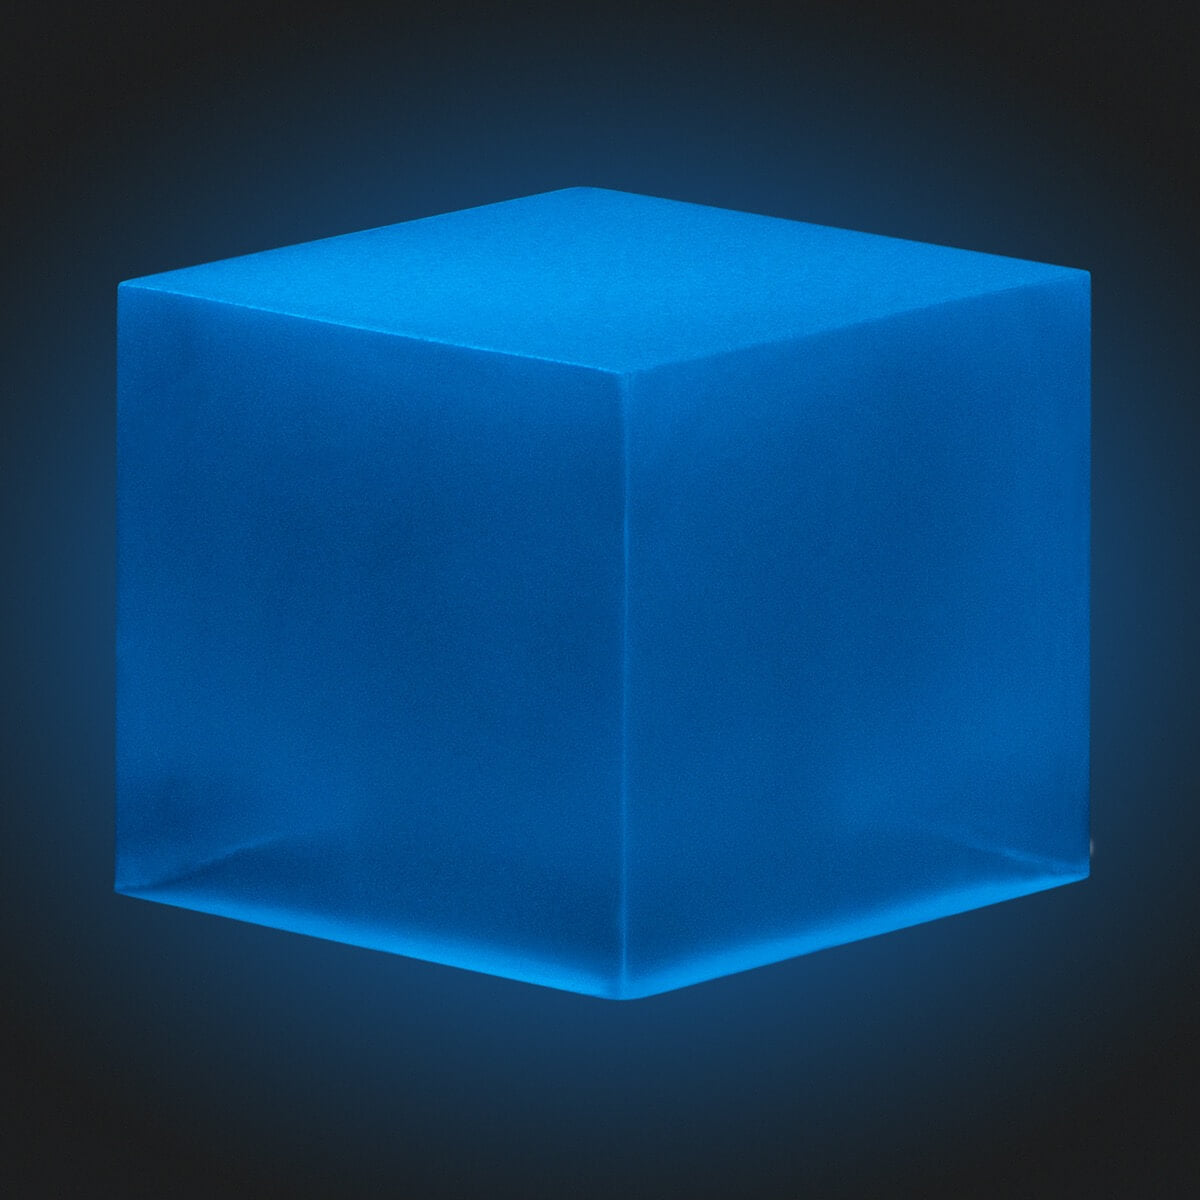 A resin cube made with the Sky Blue Glow in the Dark Mica Powder Pigment by Pigmently, seen in a dark environment to showcase the glow effect.